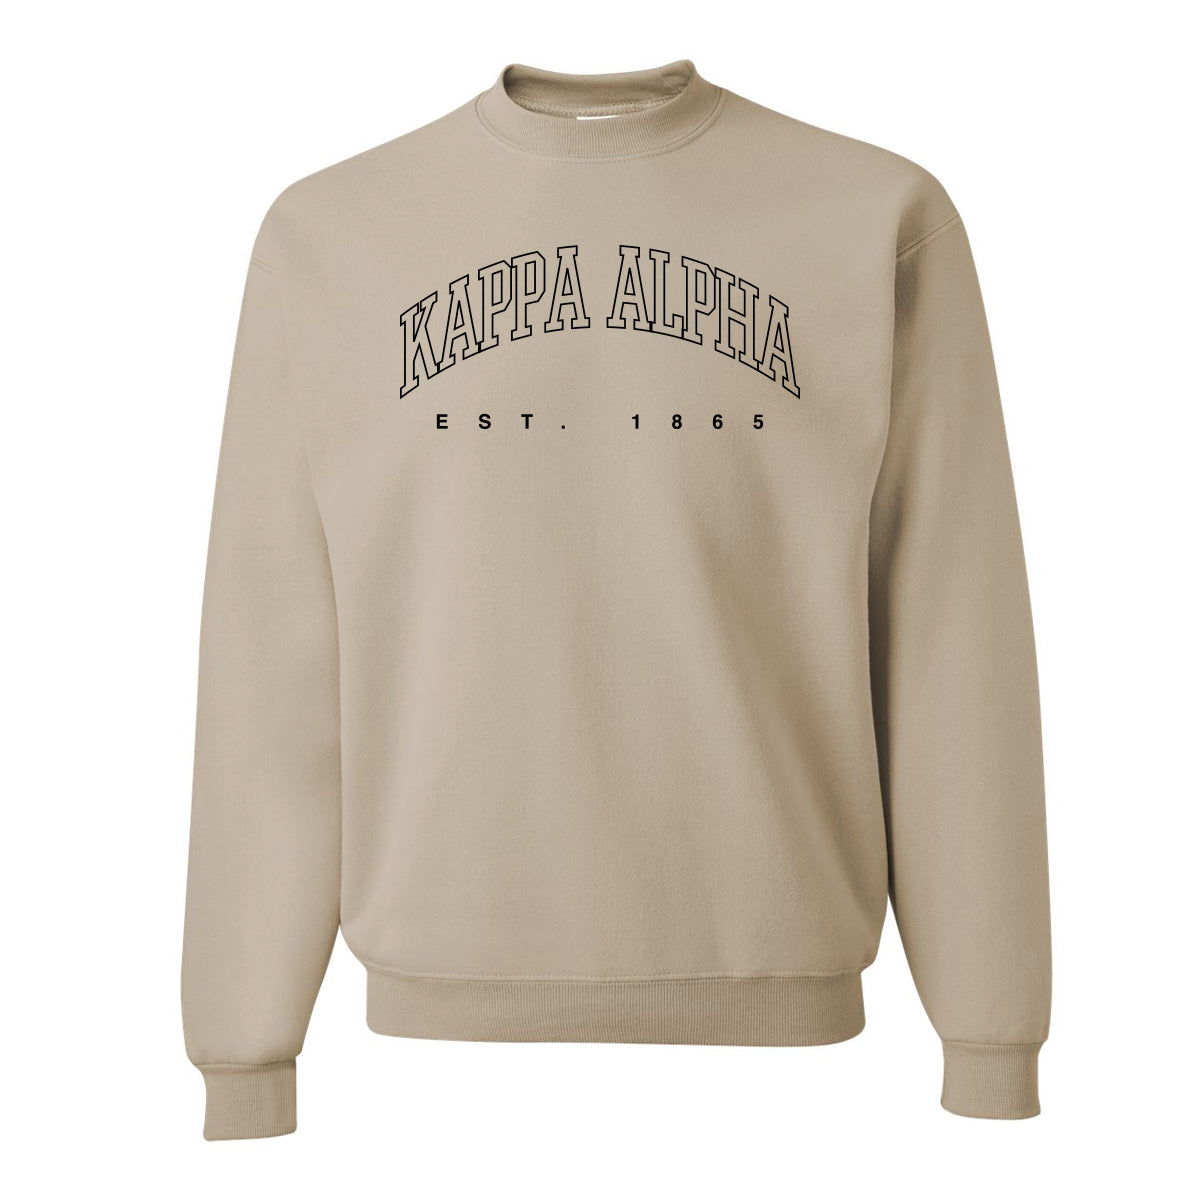 New Arrivals – Kappa Alpha Order Official Store